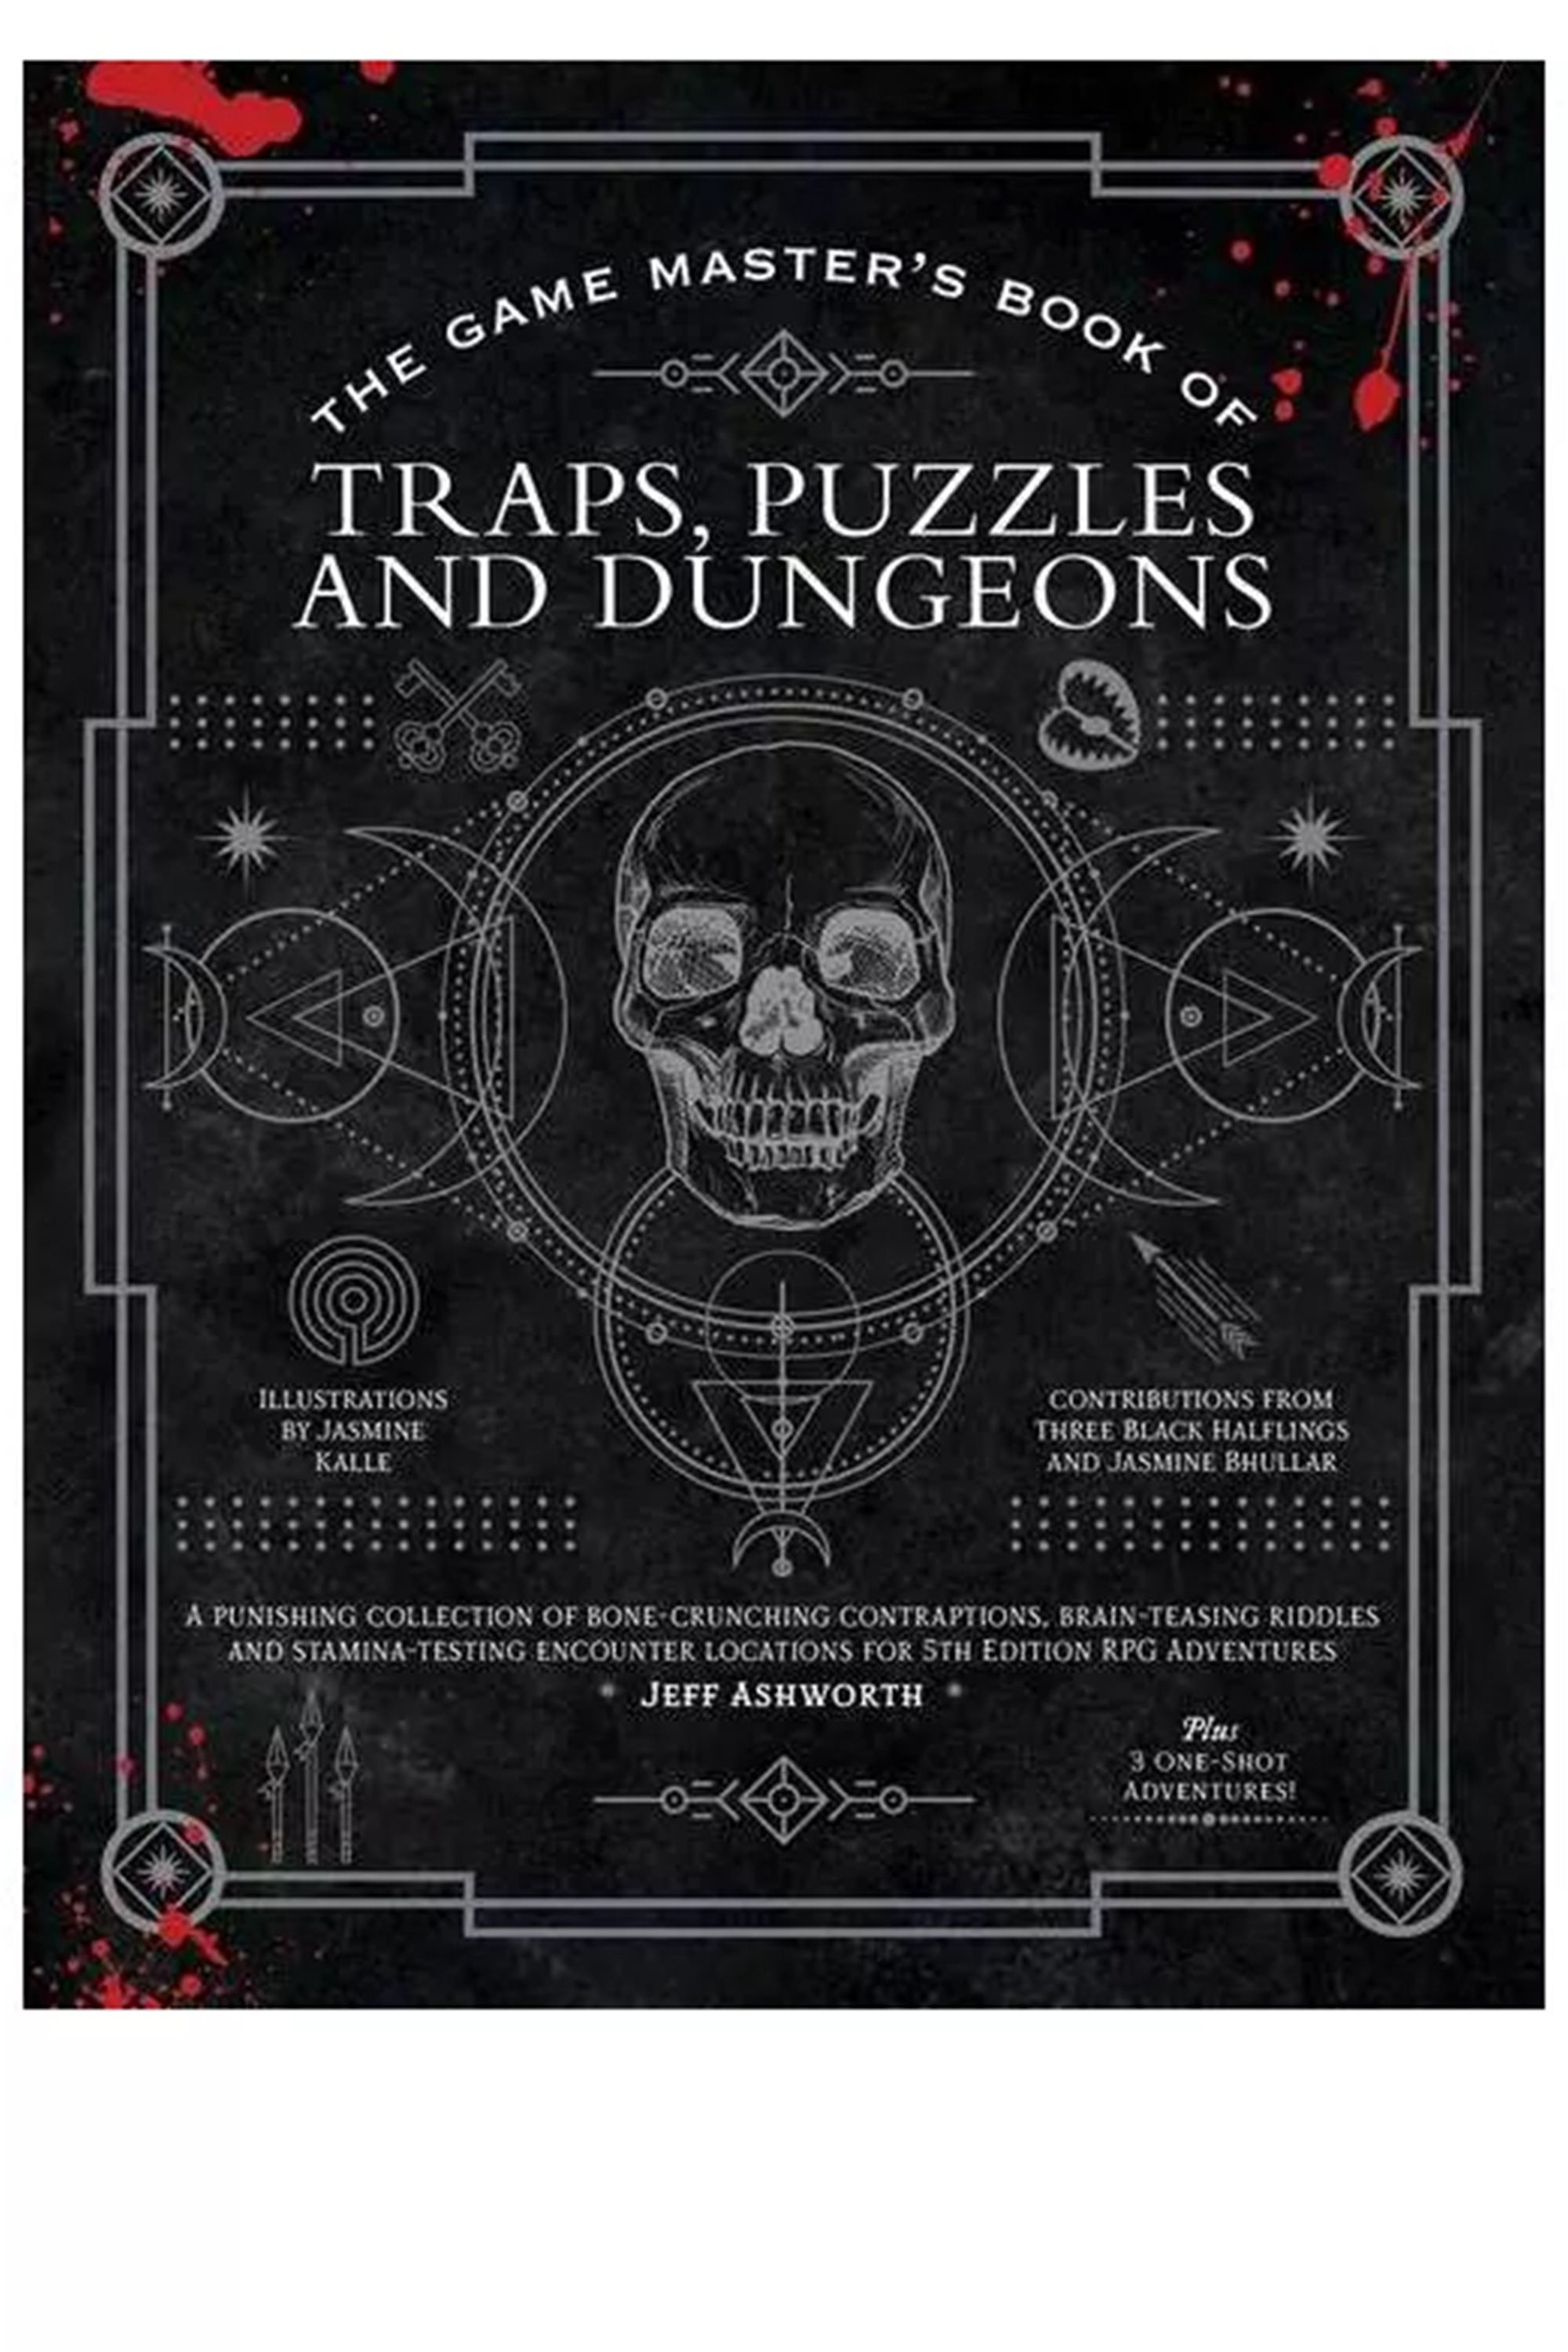 The GMs Book Of Traps, Puzzles and Dungeons